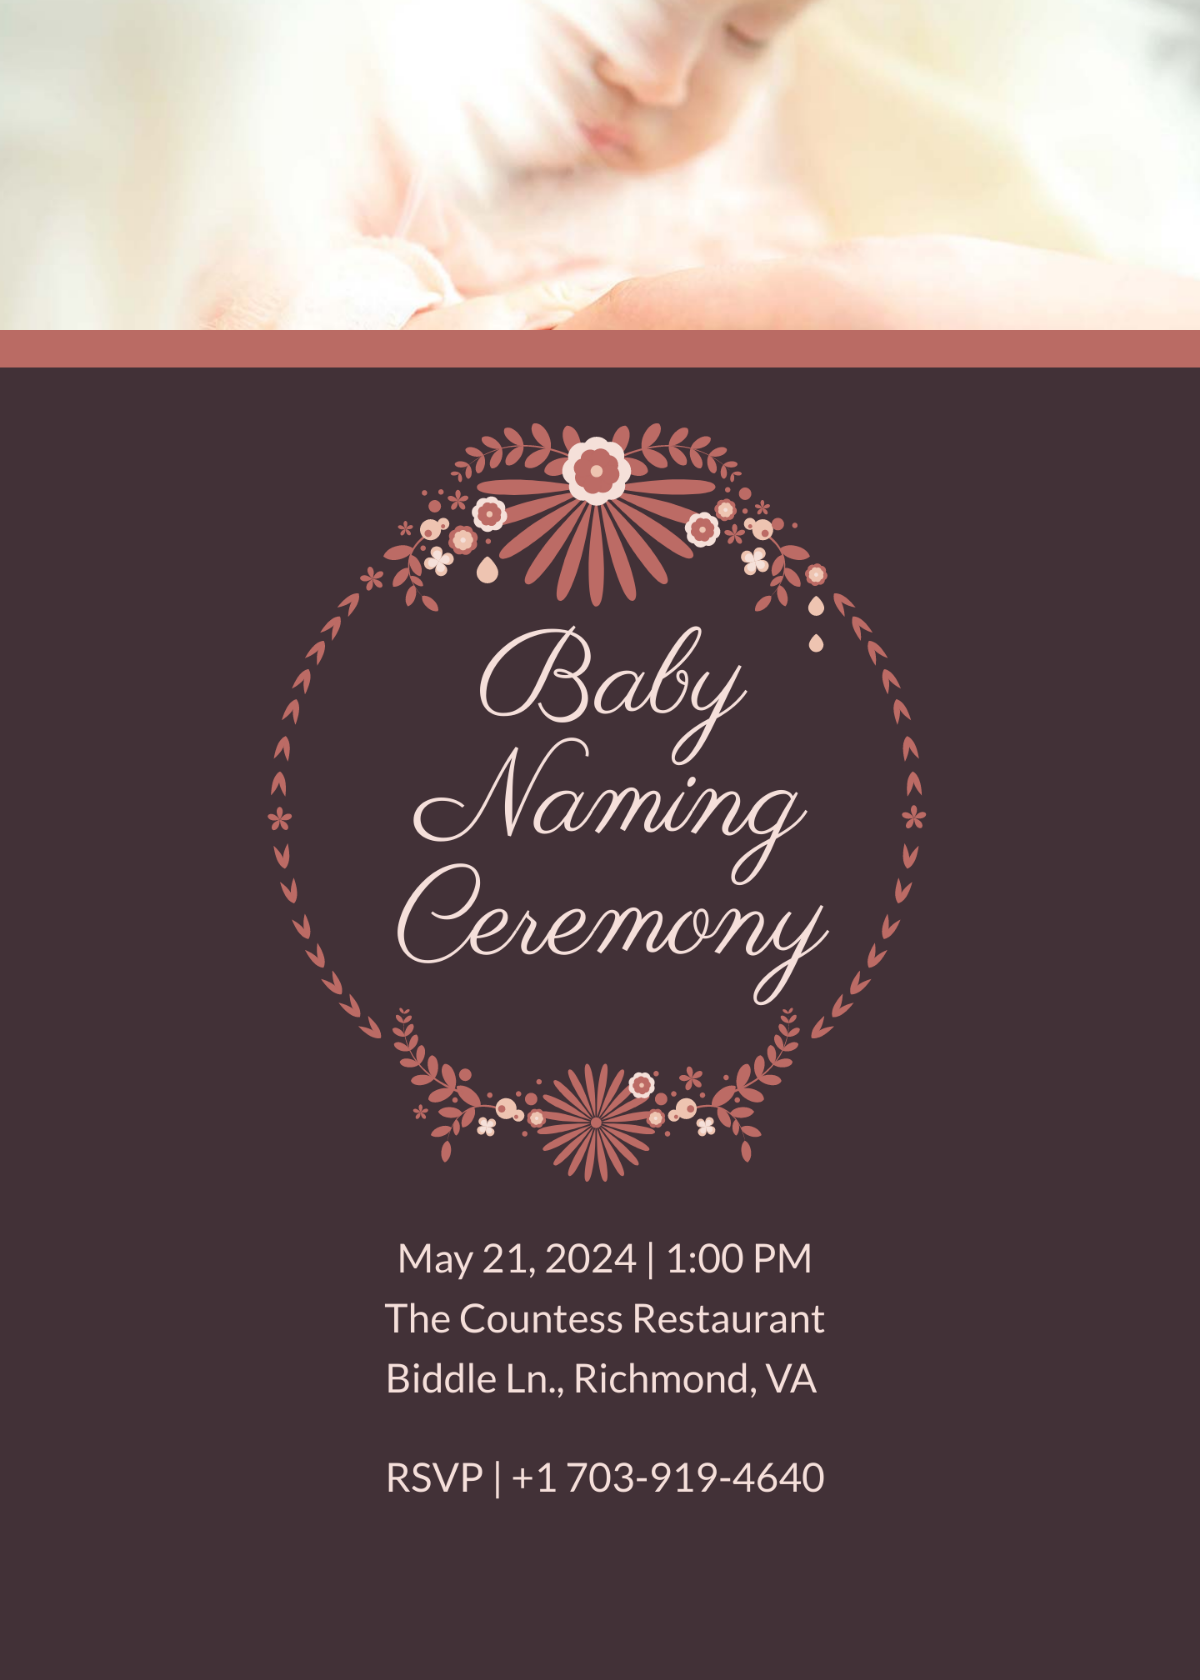 Prosperous Baby Naming Ceremony Invitation Card Template